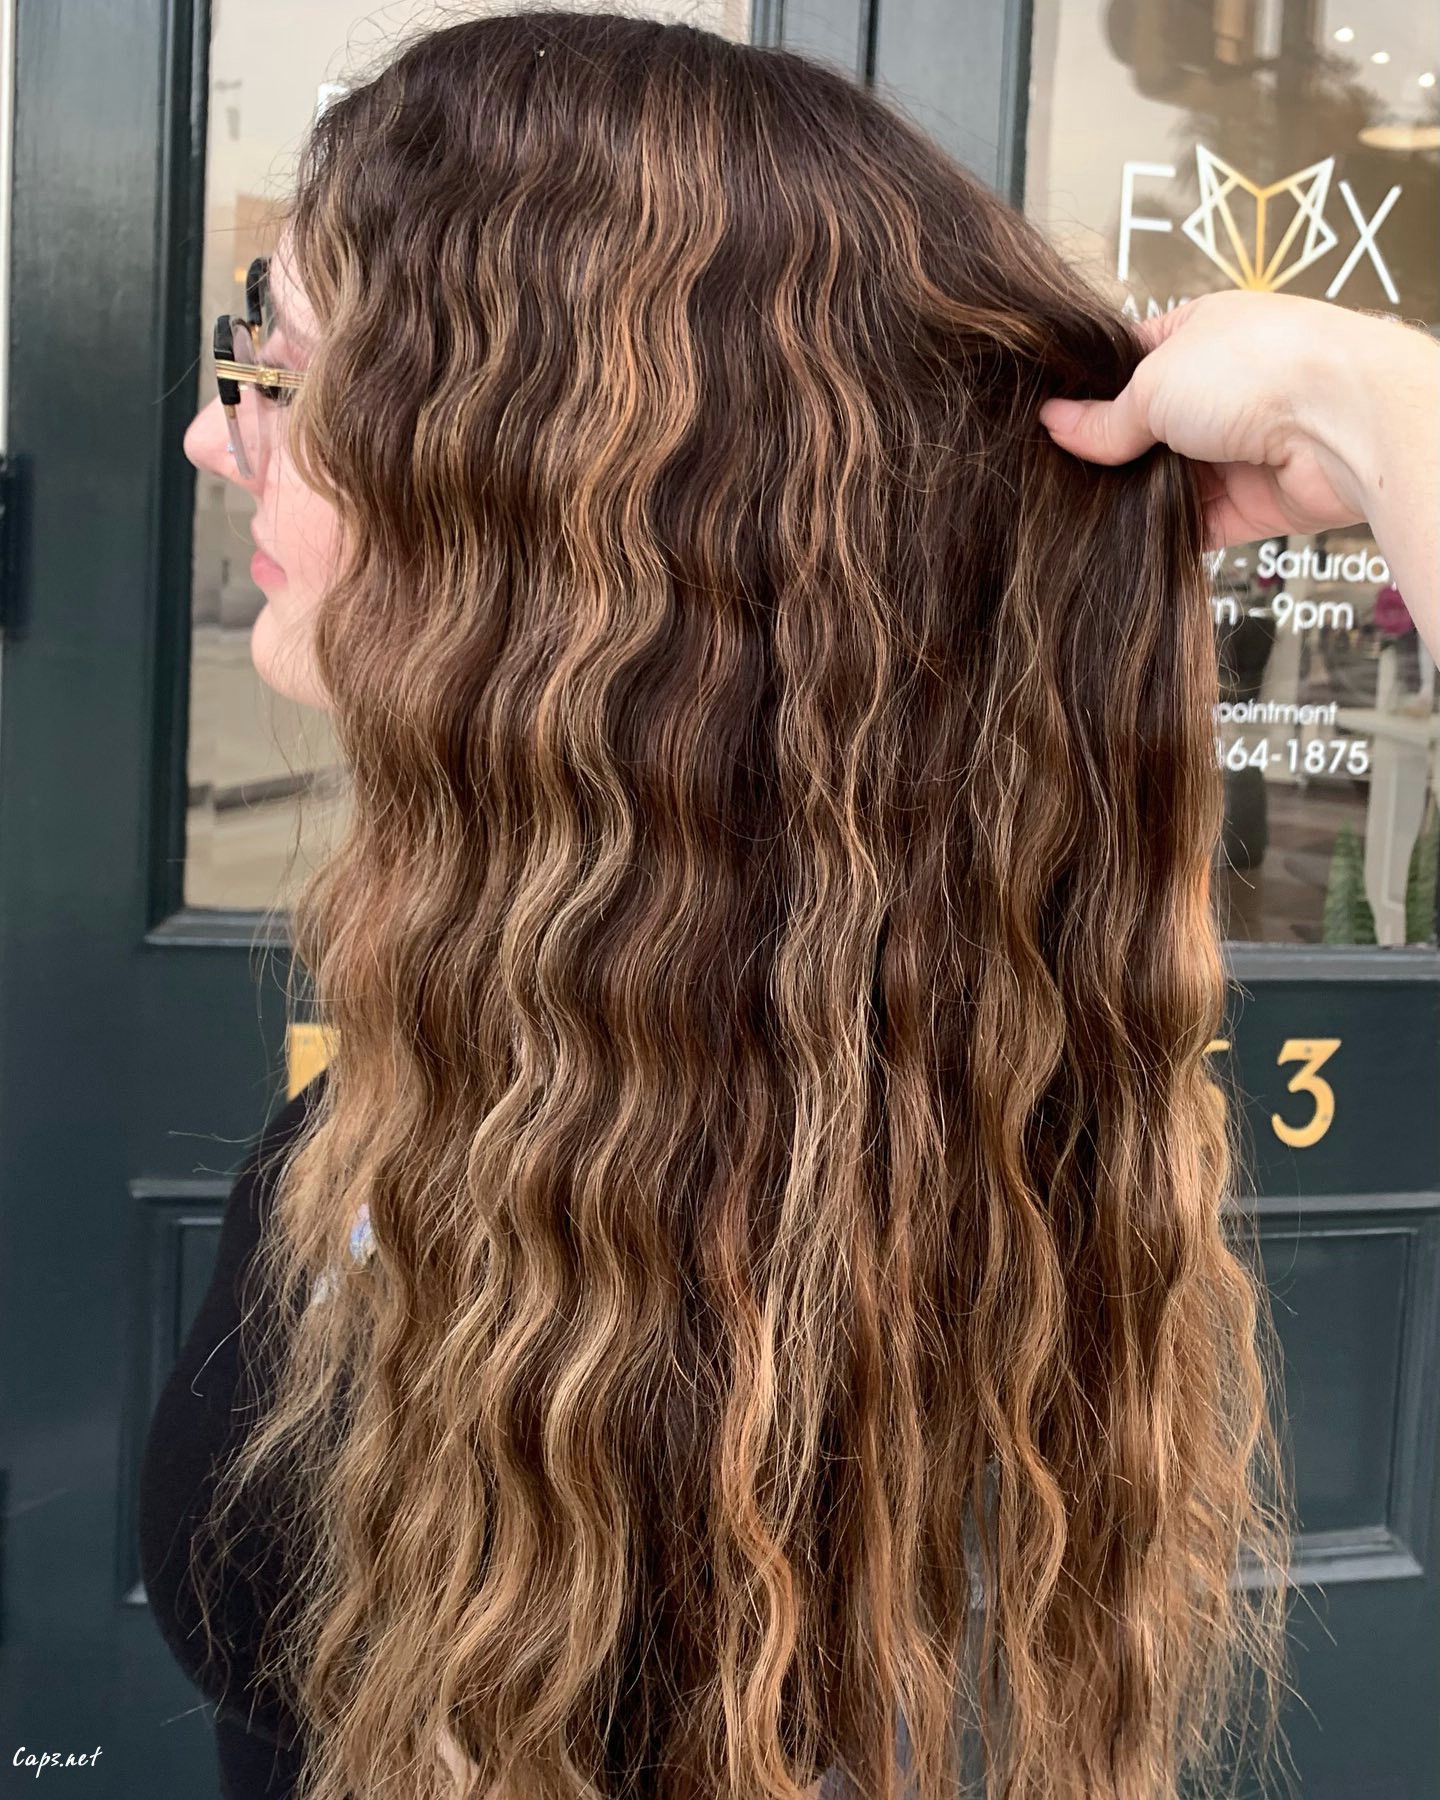 Crimped 90s Hair With Highlights